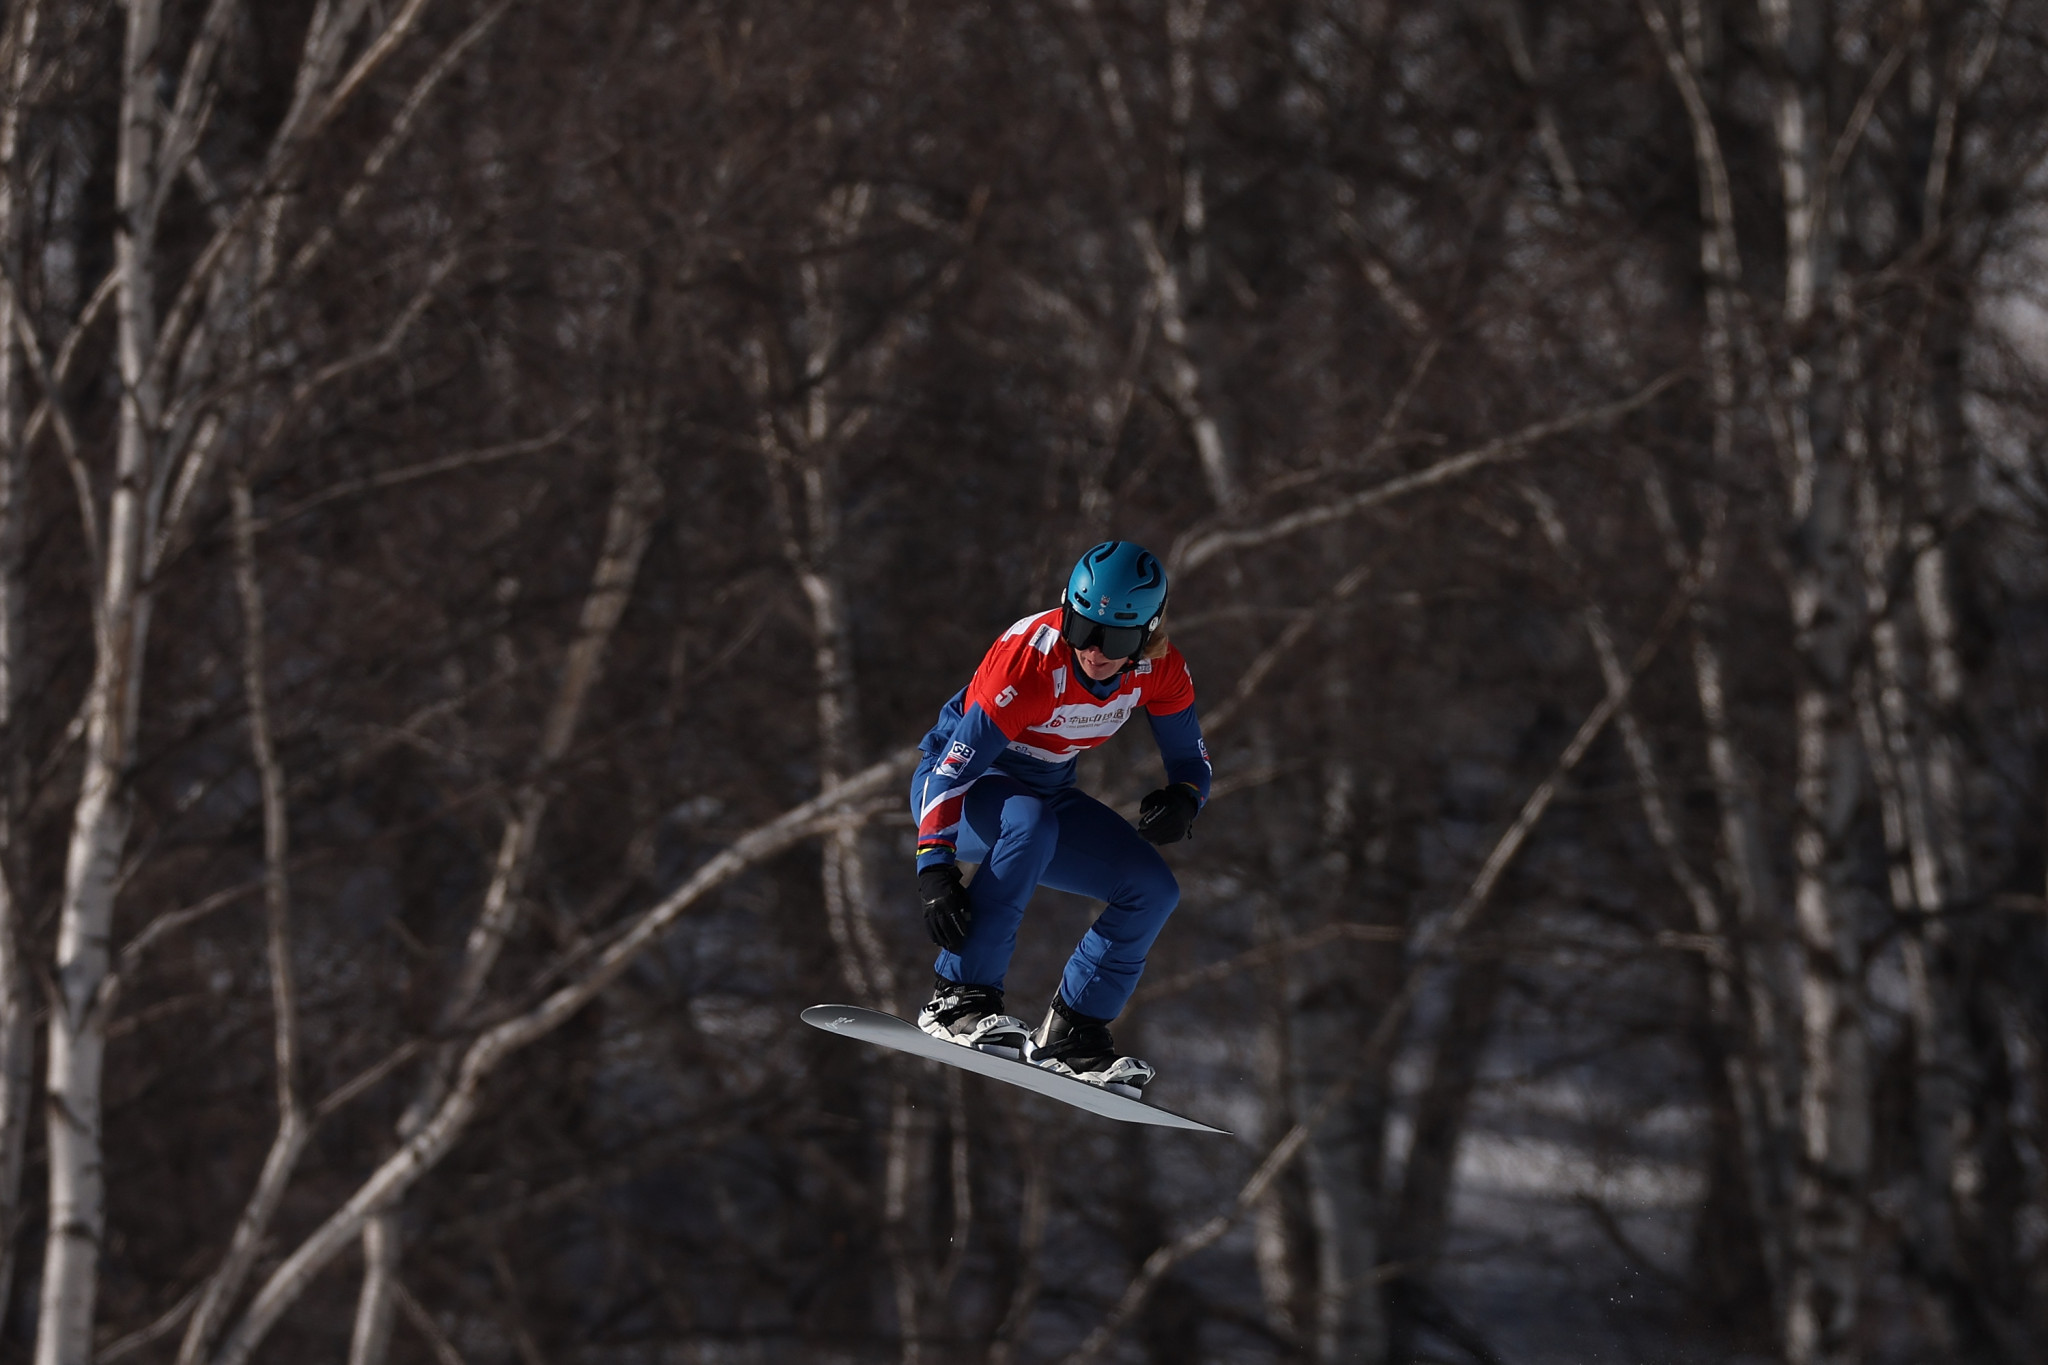 Britain's Charlotte Bankes made it back-to-back wins at the Snowboard Cross World Cup in Krasnoyarsk ©Getty Images